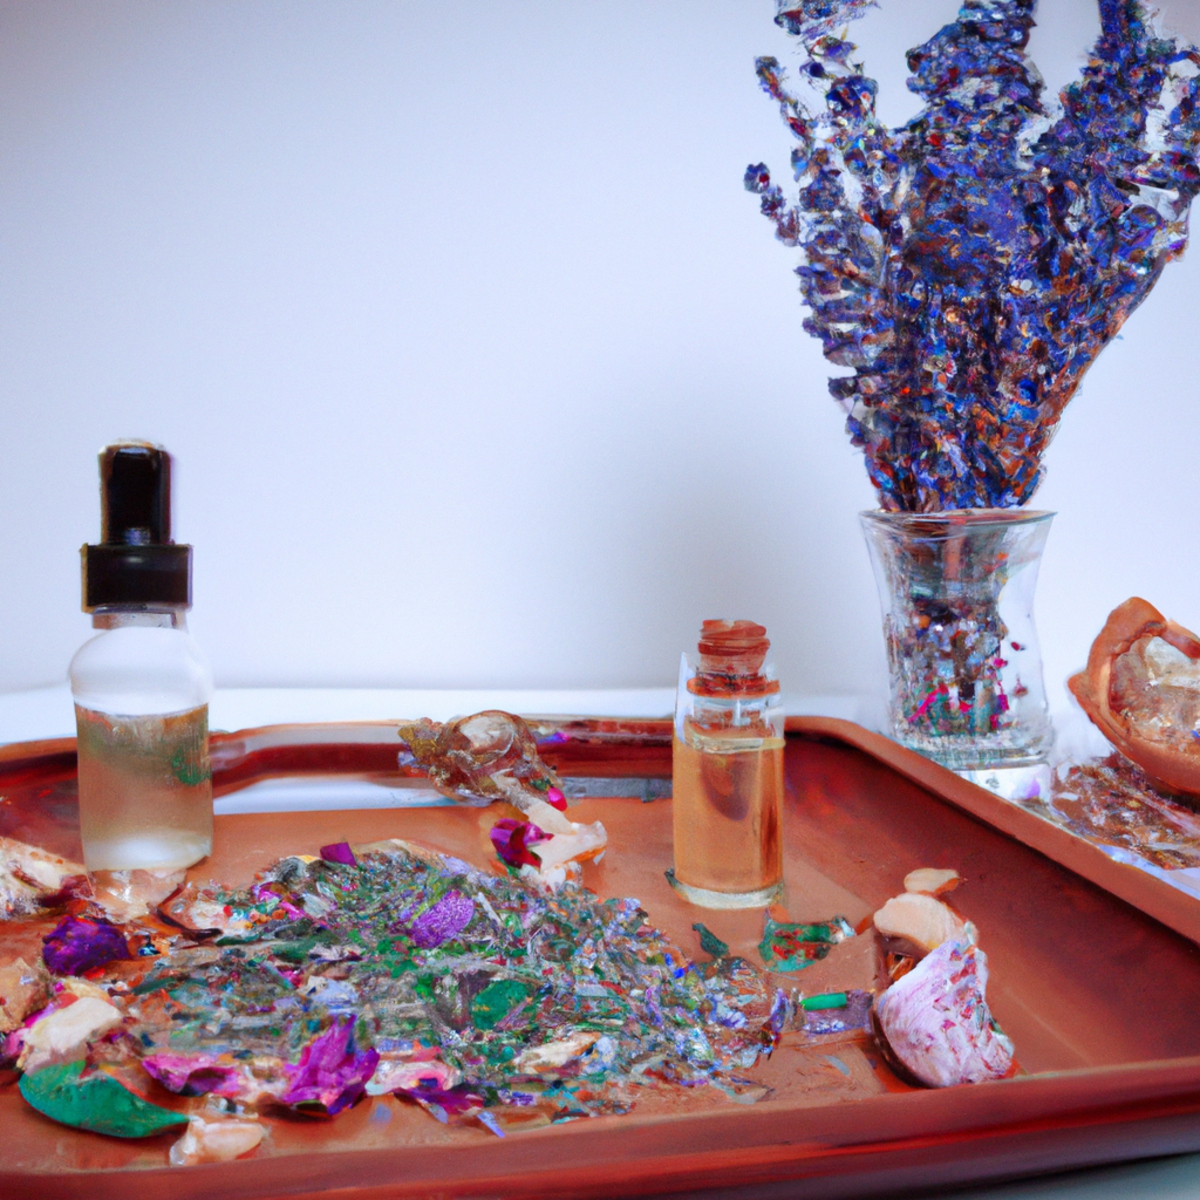 Aromatherapy tray with lavender oil, dried flowers, sage, rose petals, and diffuser emitting calming mist for stress relief.